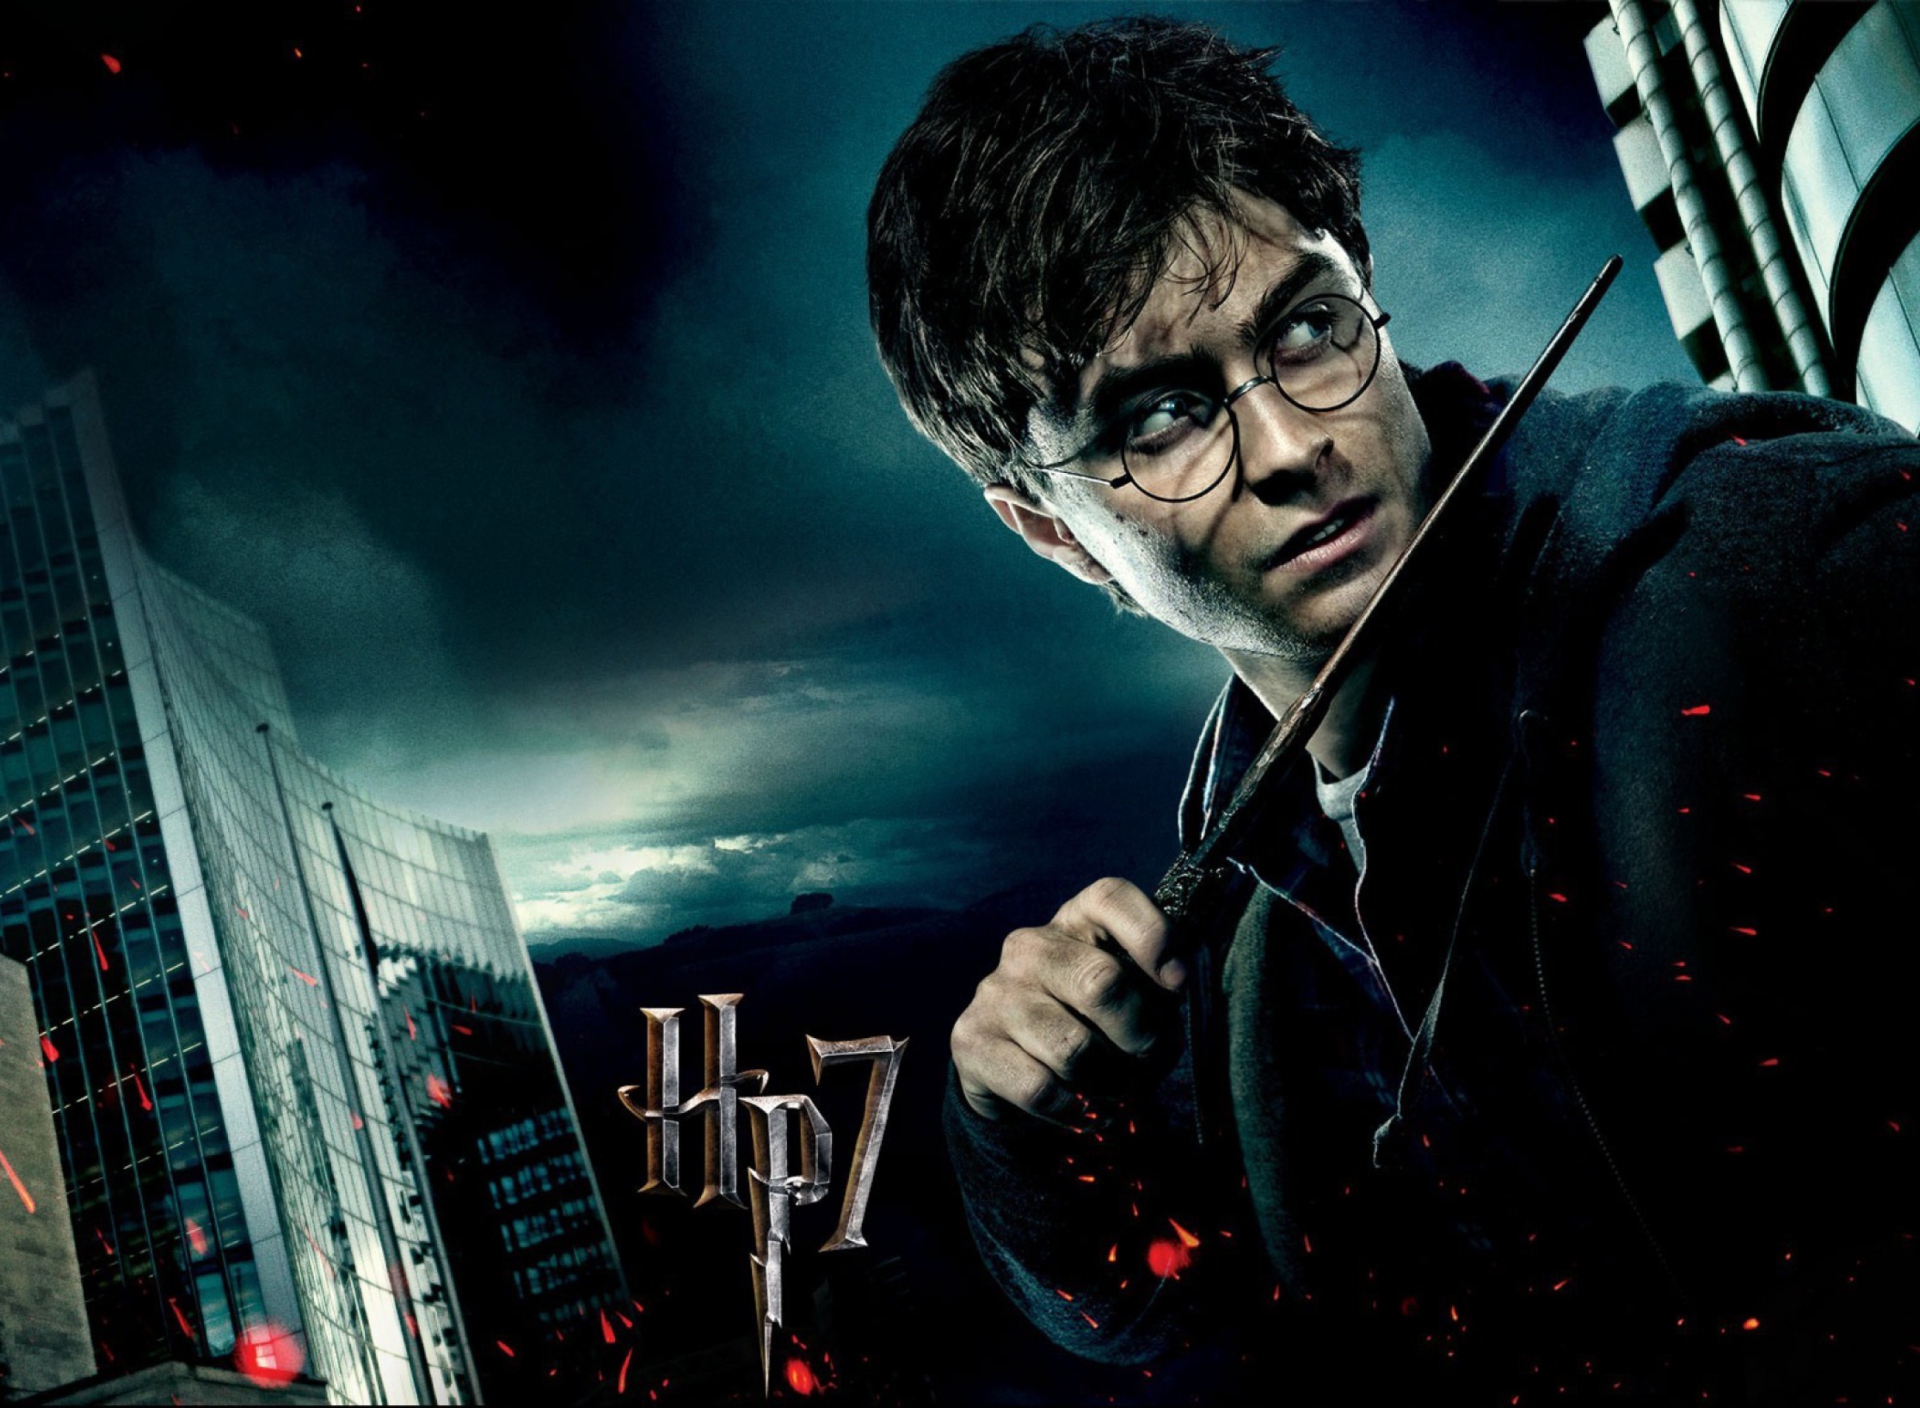 Harry Potter And The Deathly Hallows Part-1 wallpaper 1920x1408